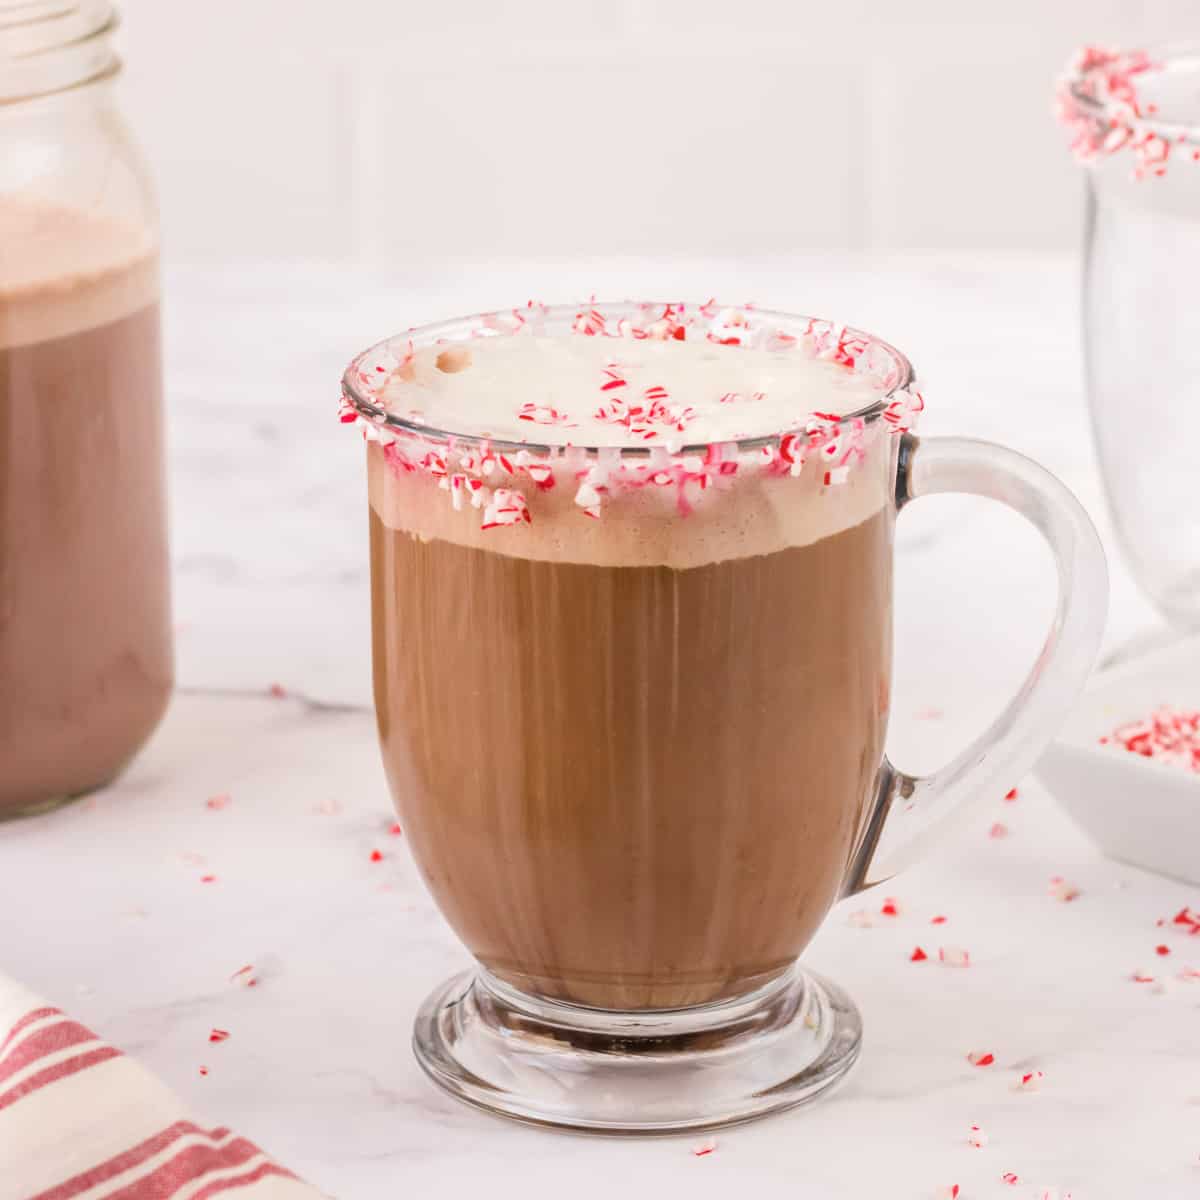 How to Make a Mocha at Home